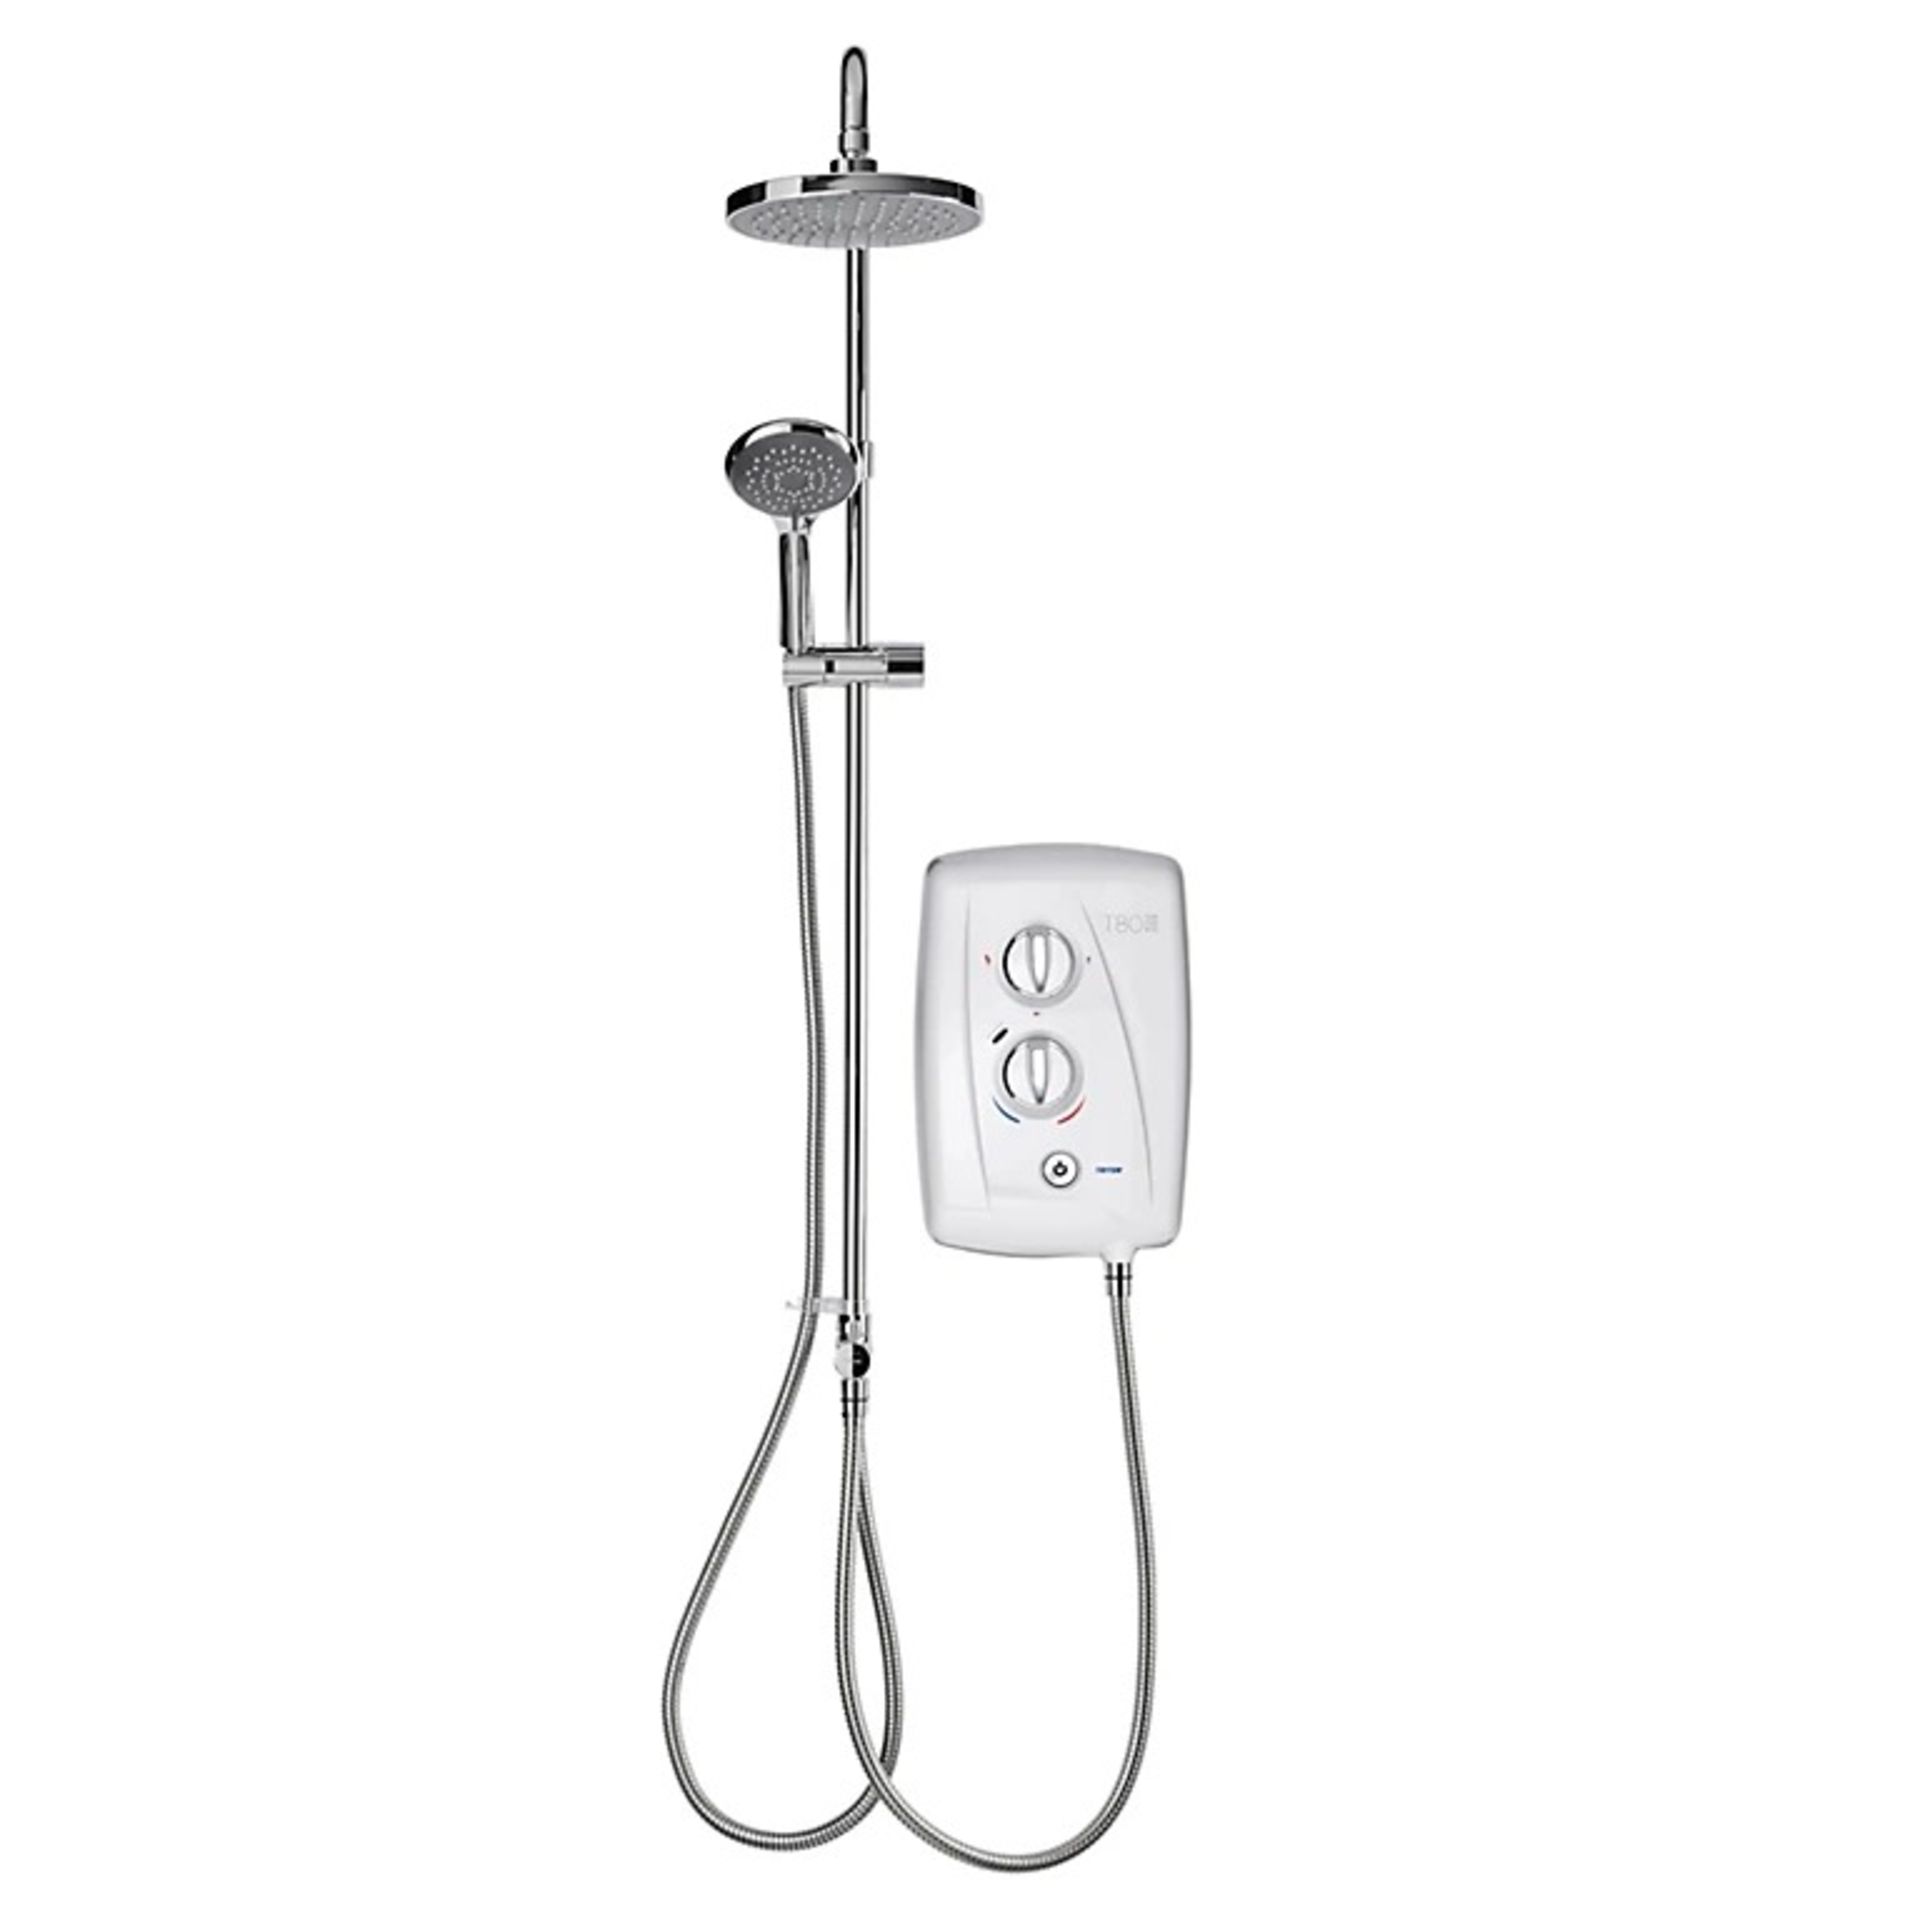 Triton T80 Easi-Fit+ DuElec Gloss Chrome effect Electric mixer Shower - ER41 *Unit Only